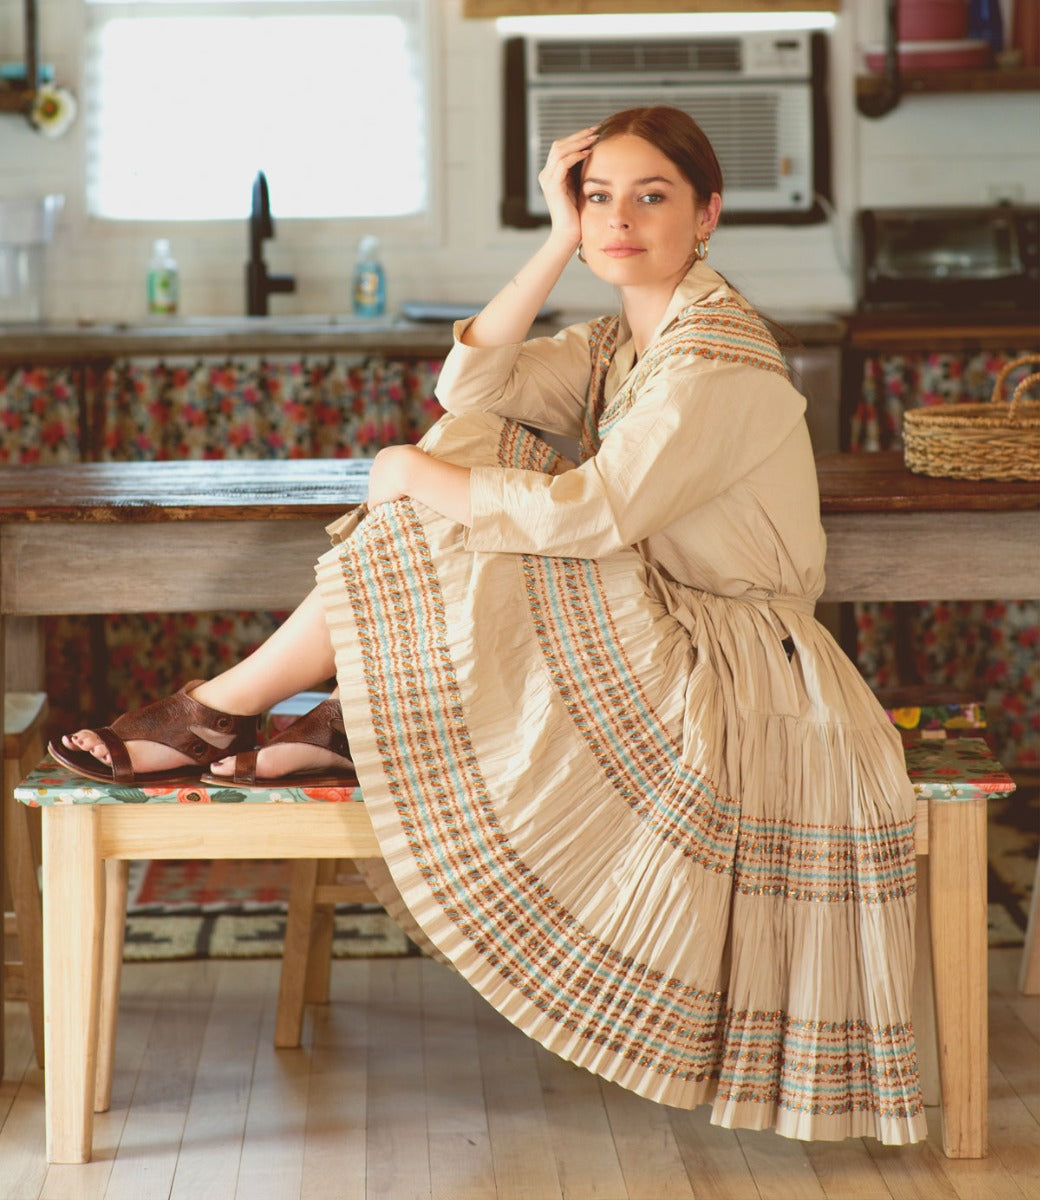 A woman in a tan dress sitting on a bench in a kitchen wearing Soto sandals by Bed Stu.